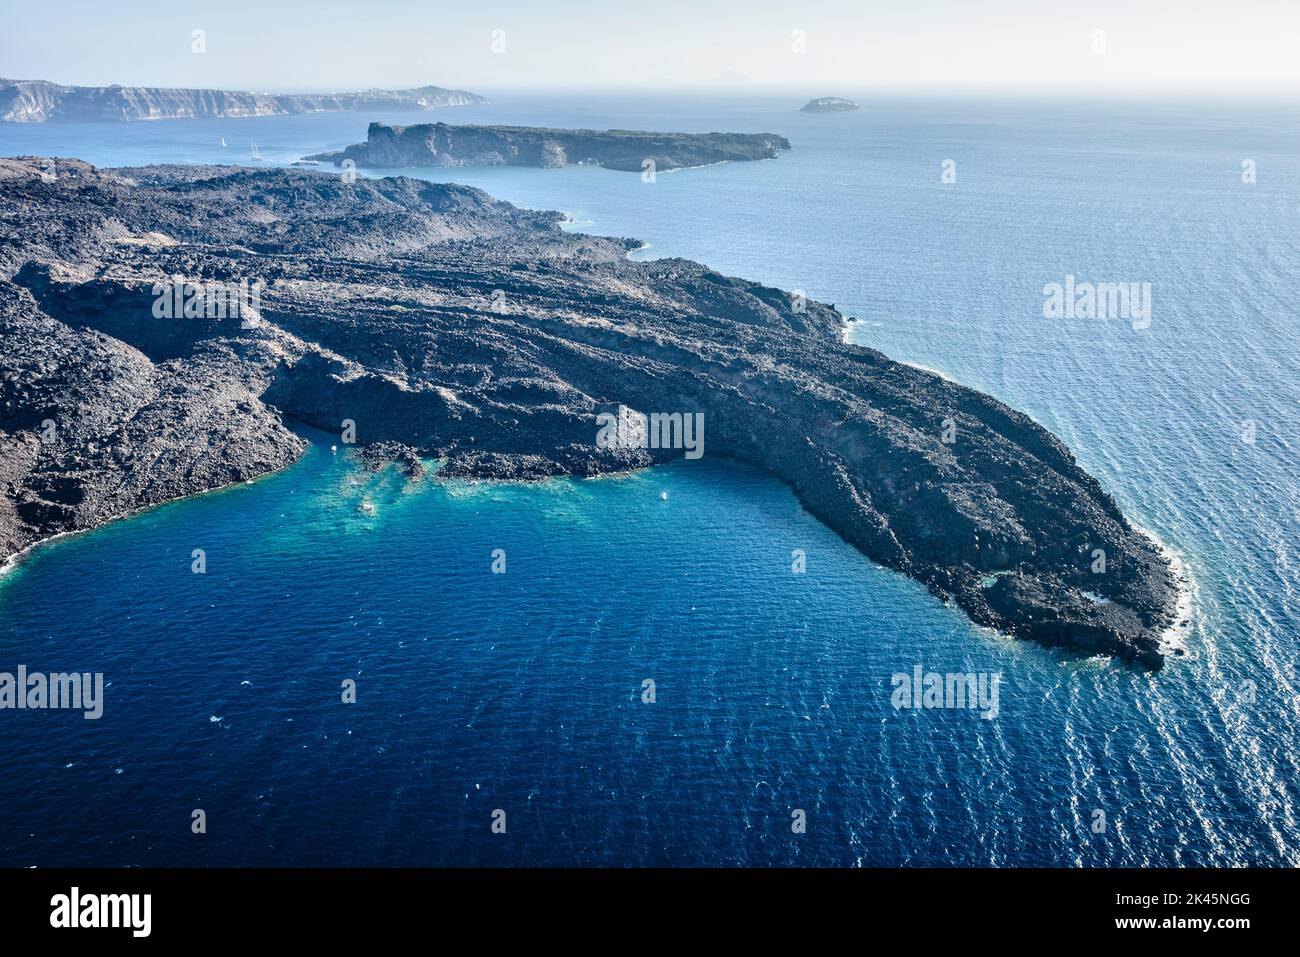 Aerial view of a headland on a island in the Aegean sea, volcanic rock formations, black ridges and small quiet inlets and islands. Boats in the dista Stock Photo